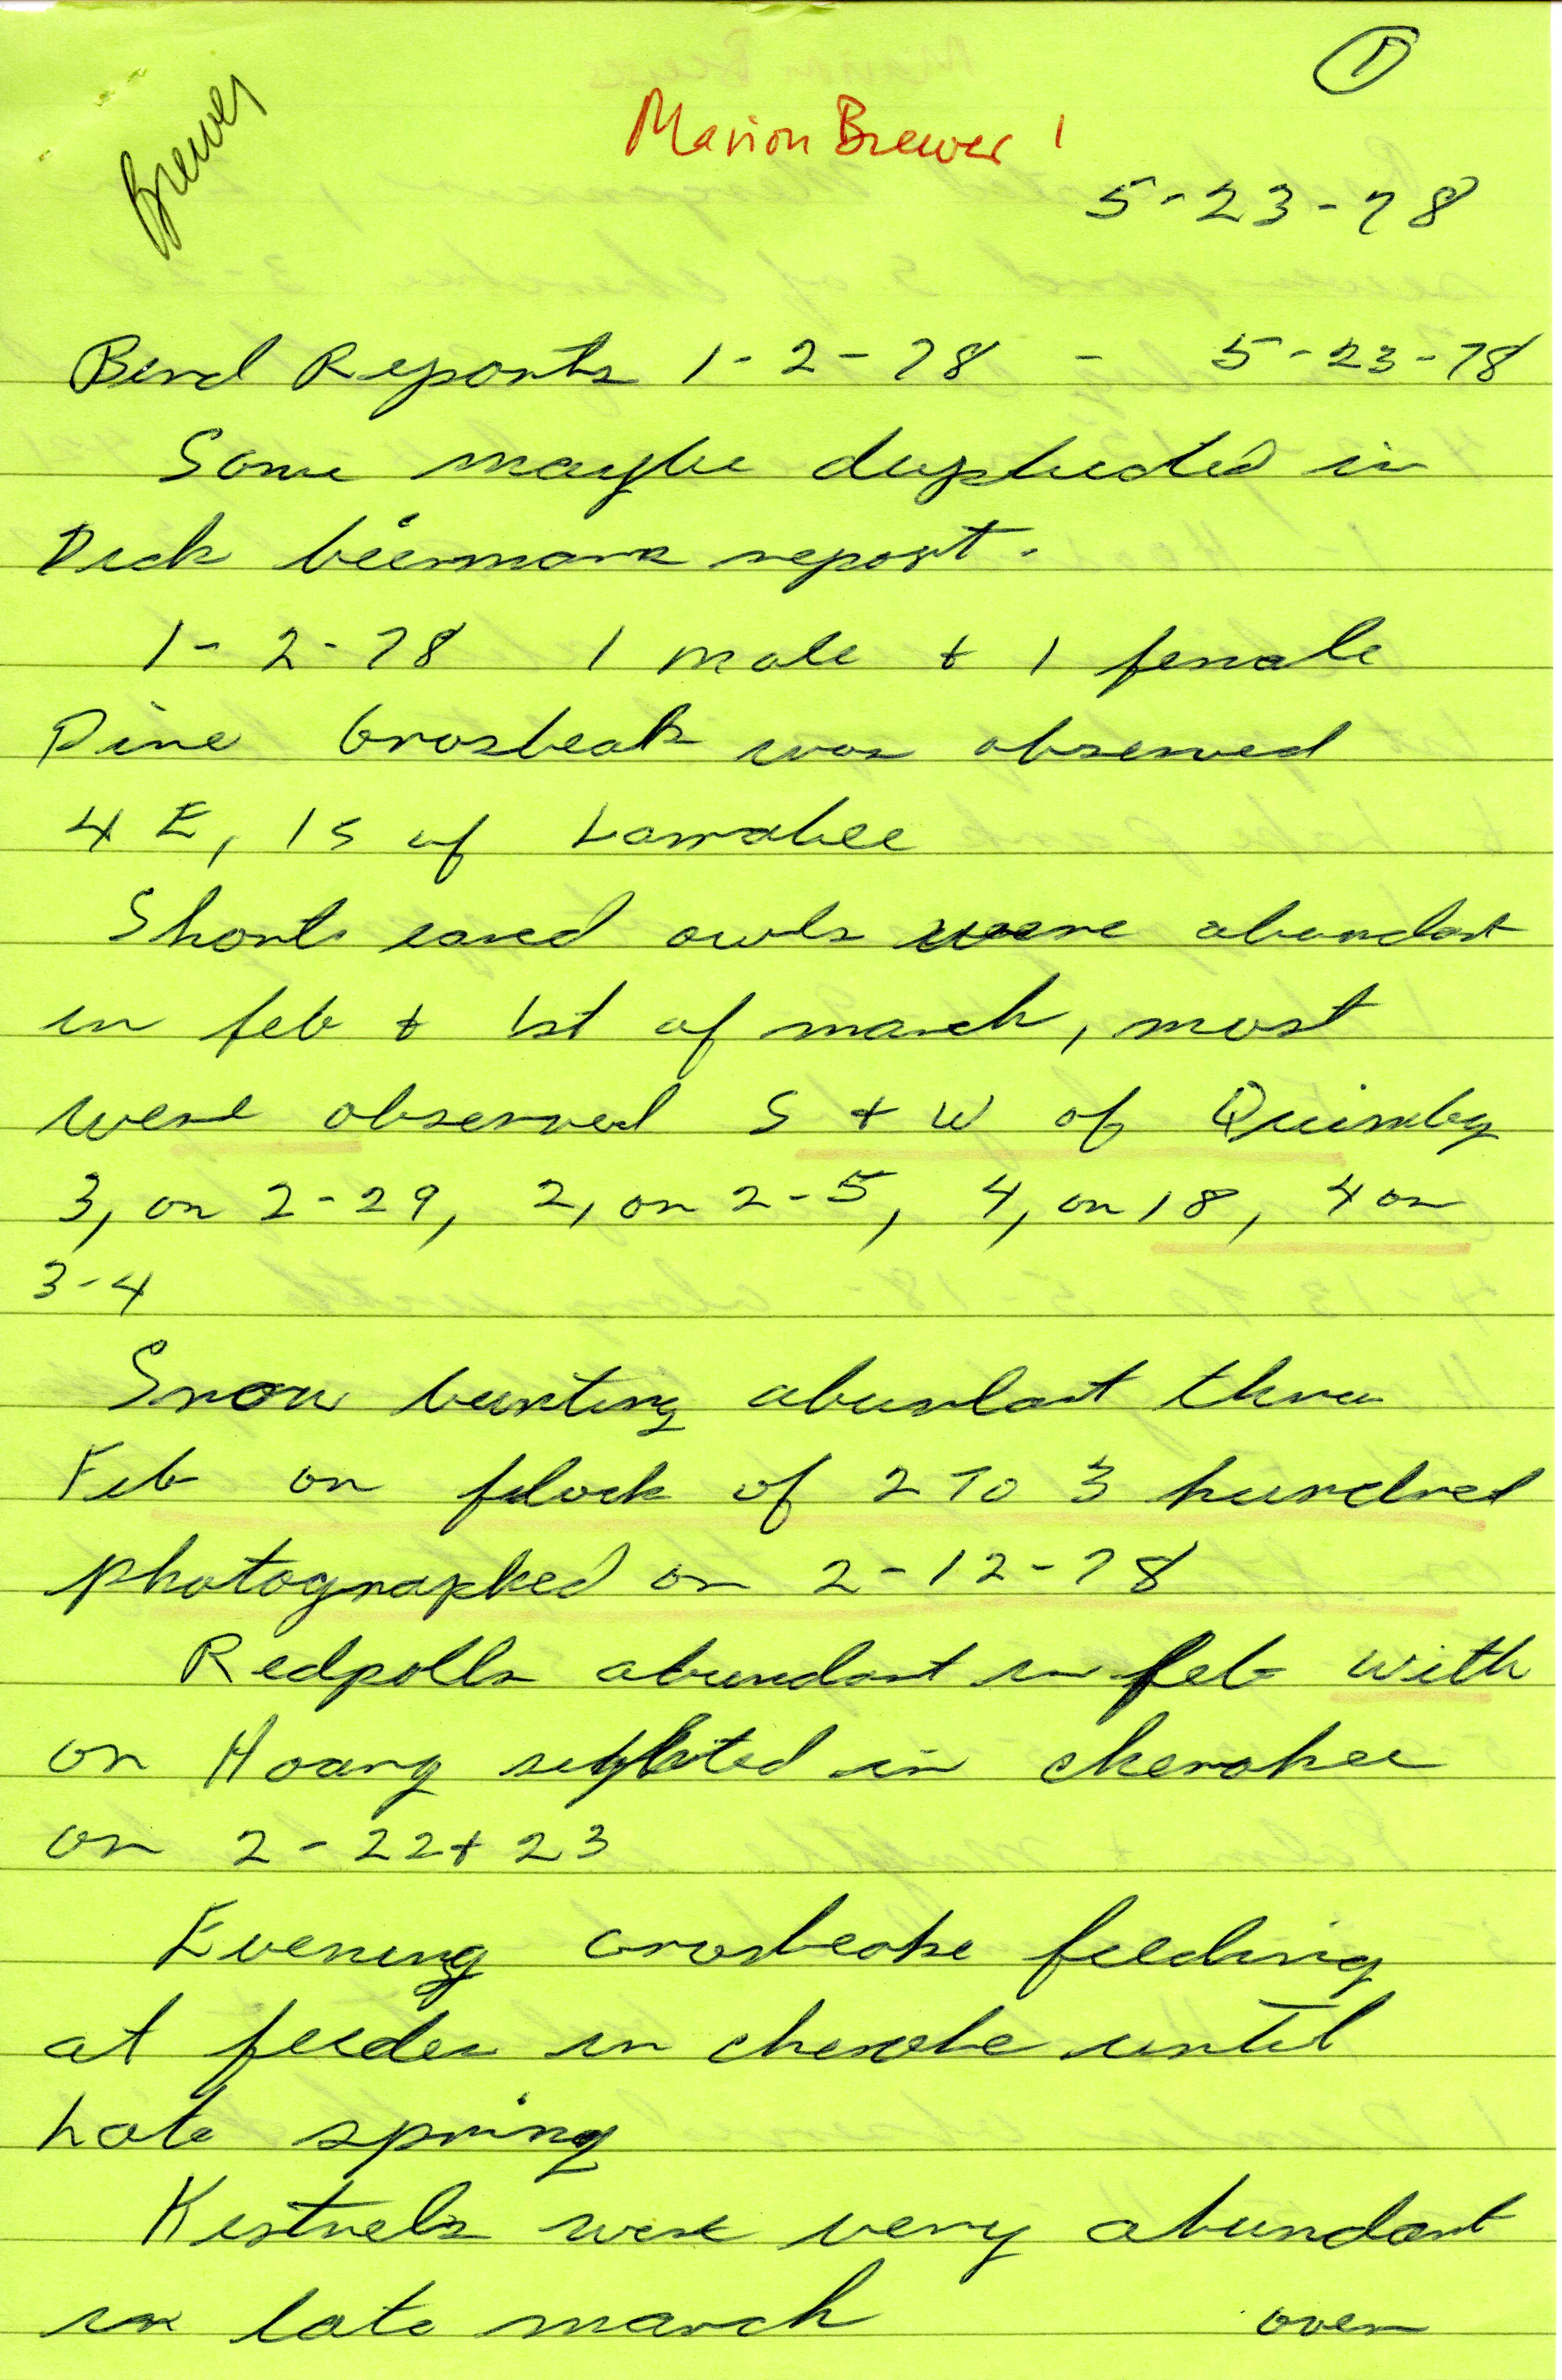 Bird report, January 2 to May 23, 1978